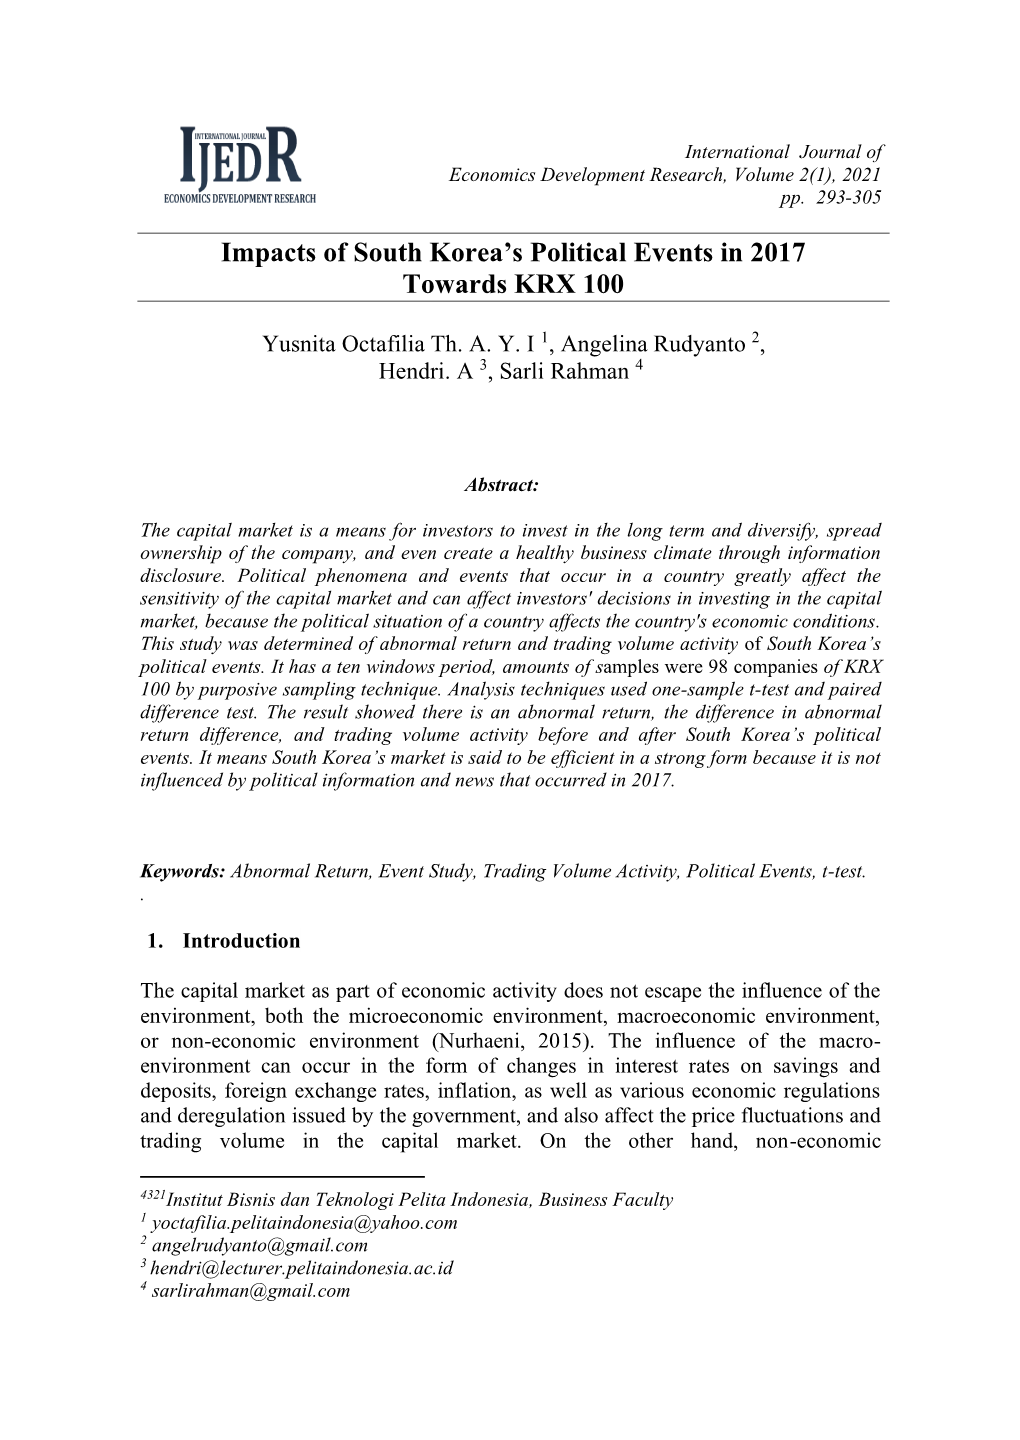 Impacts of South Korea's Political Events in 2017 Towards KRX